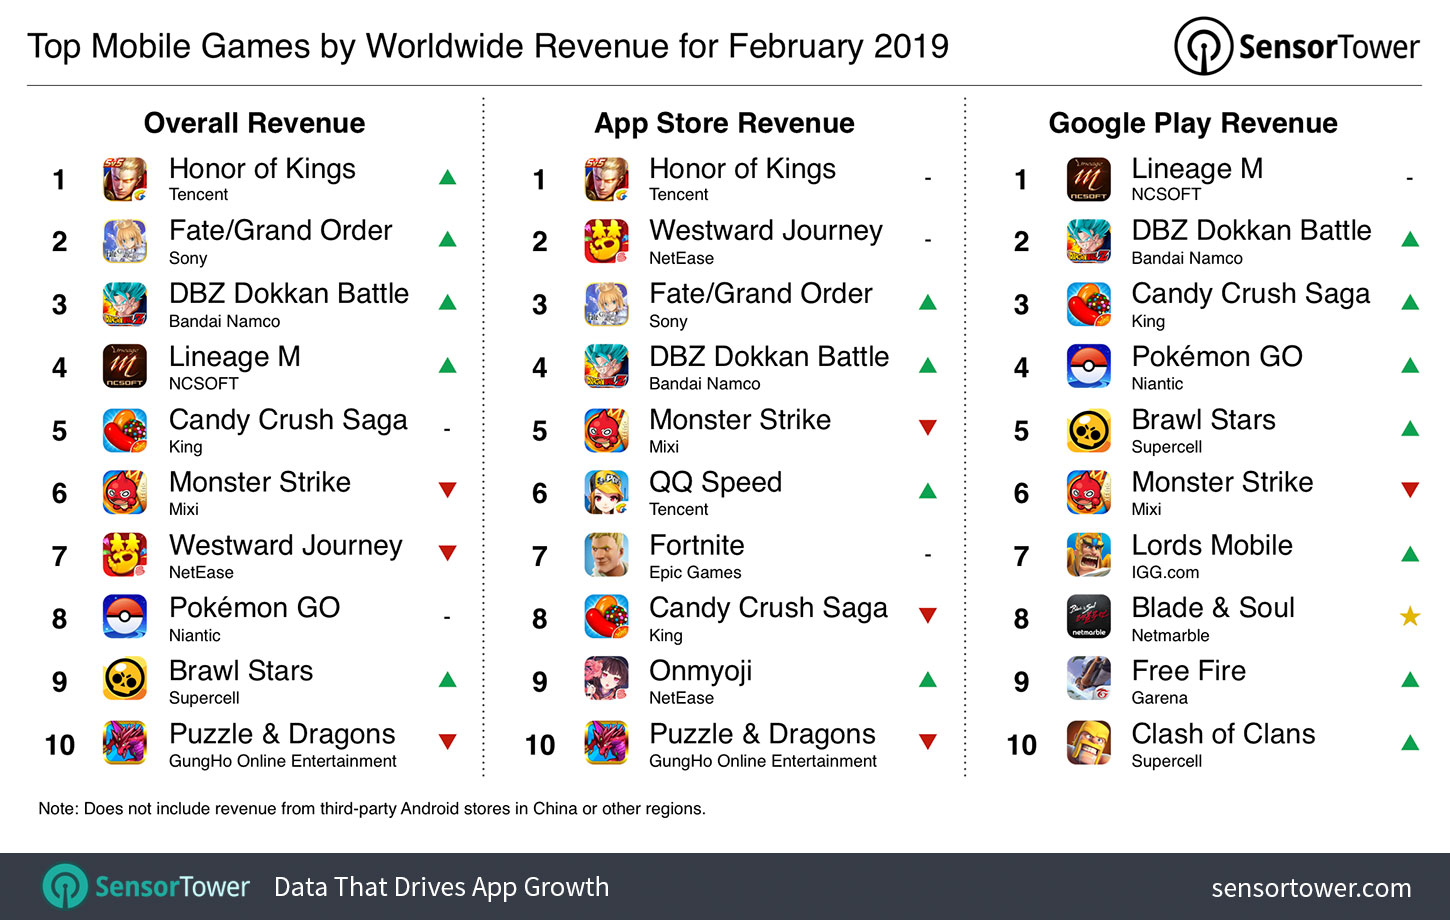 Top Mobile Games by Revenue for February 2019